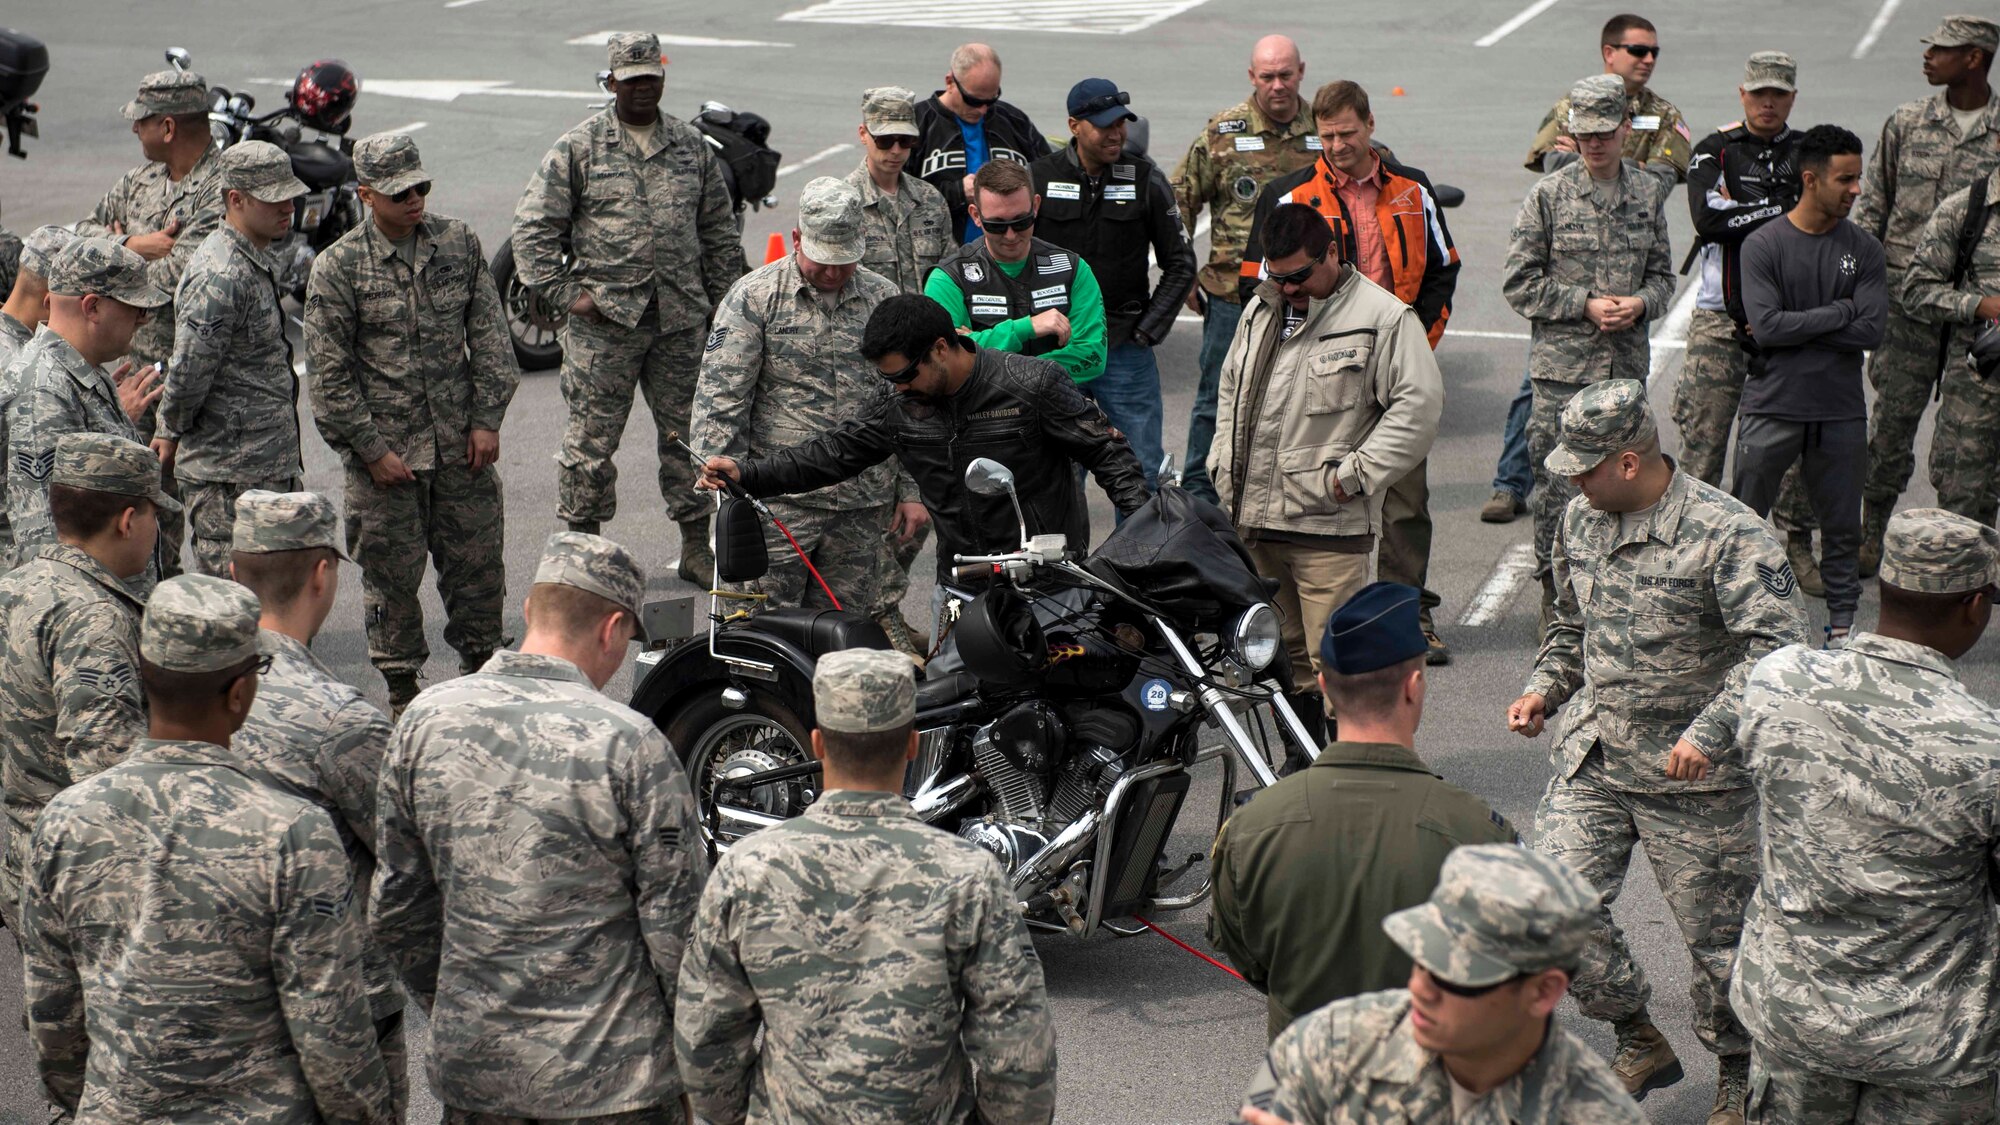 Members of Wing Safety perform a pre-ride inspection checklist with riders during an 18th Wing annual motorcycle safety brief March 9, 2017, at Kadena Air Base, Japan. Wing Safety and the Green Knights chapter 138 reminded riders of their legal responsibilities and also organized a motorcycle skills refresher course. (U.S. Air Force photo by Staff Sgt. Peter Reft/Released)